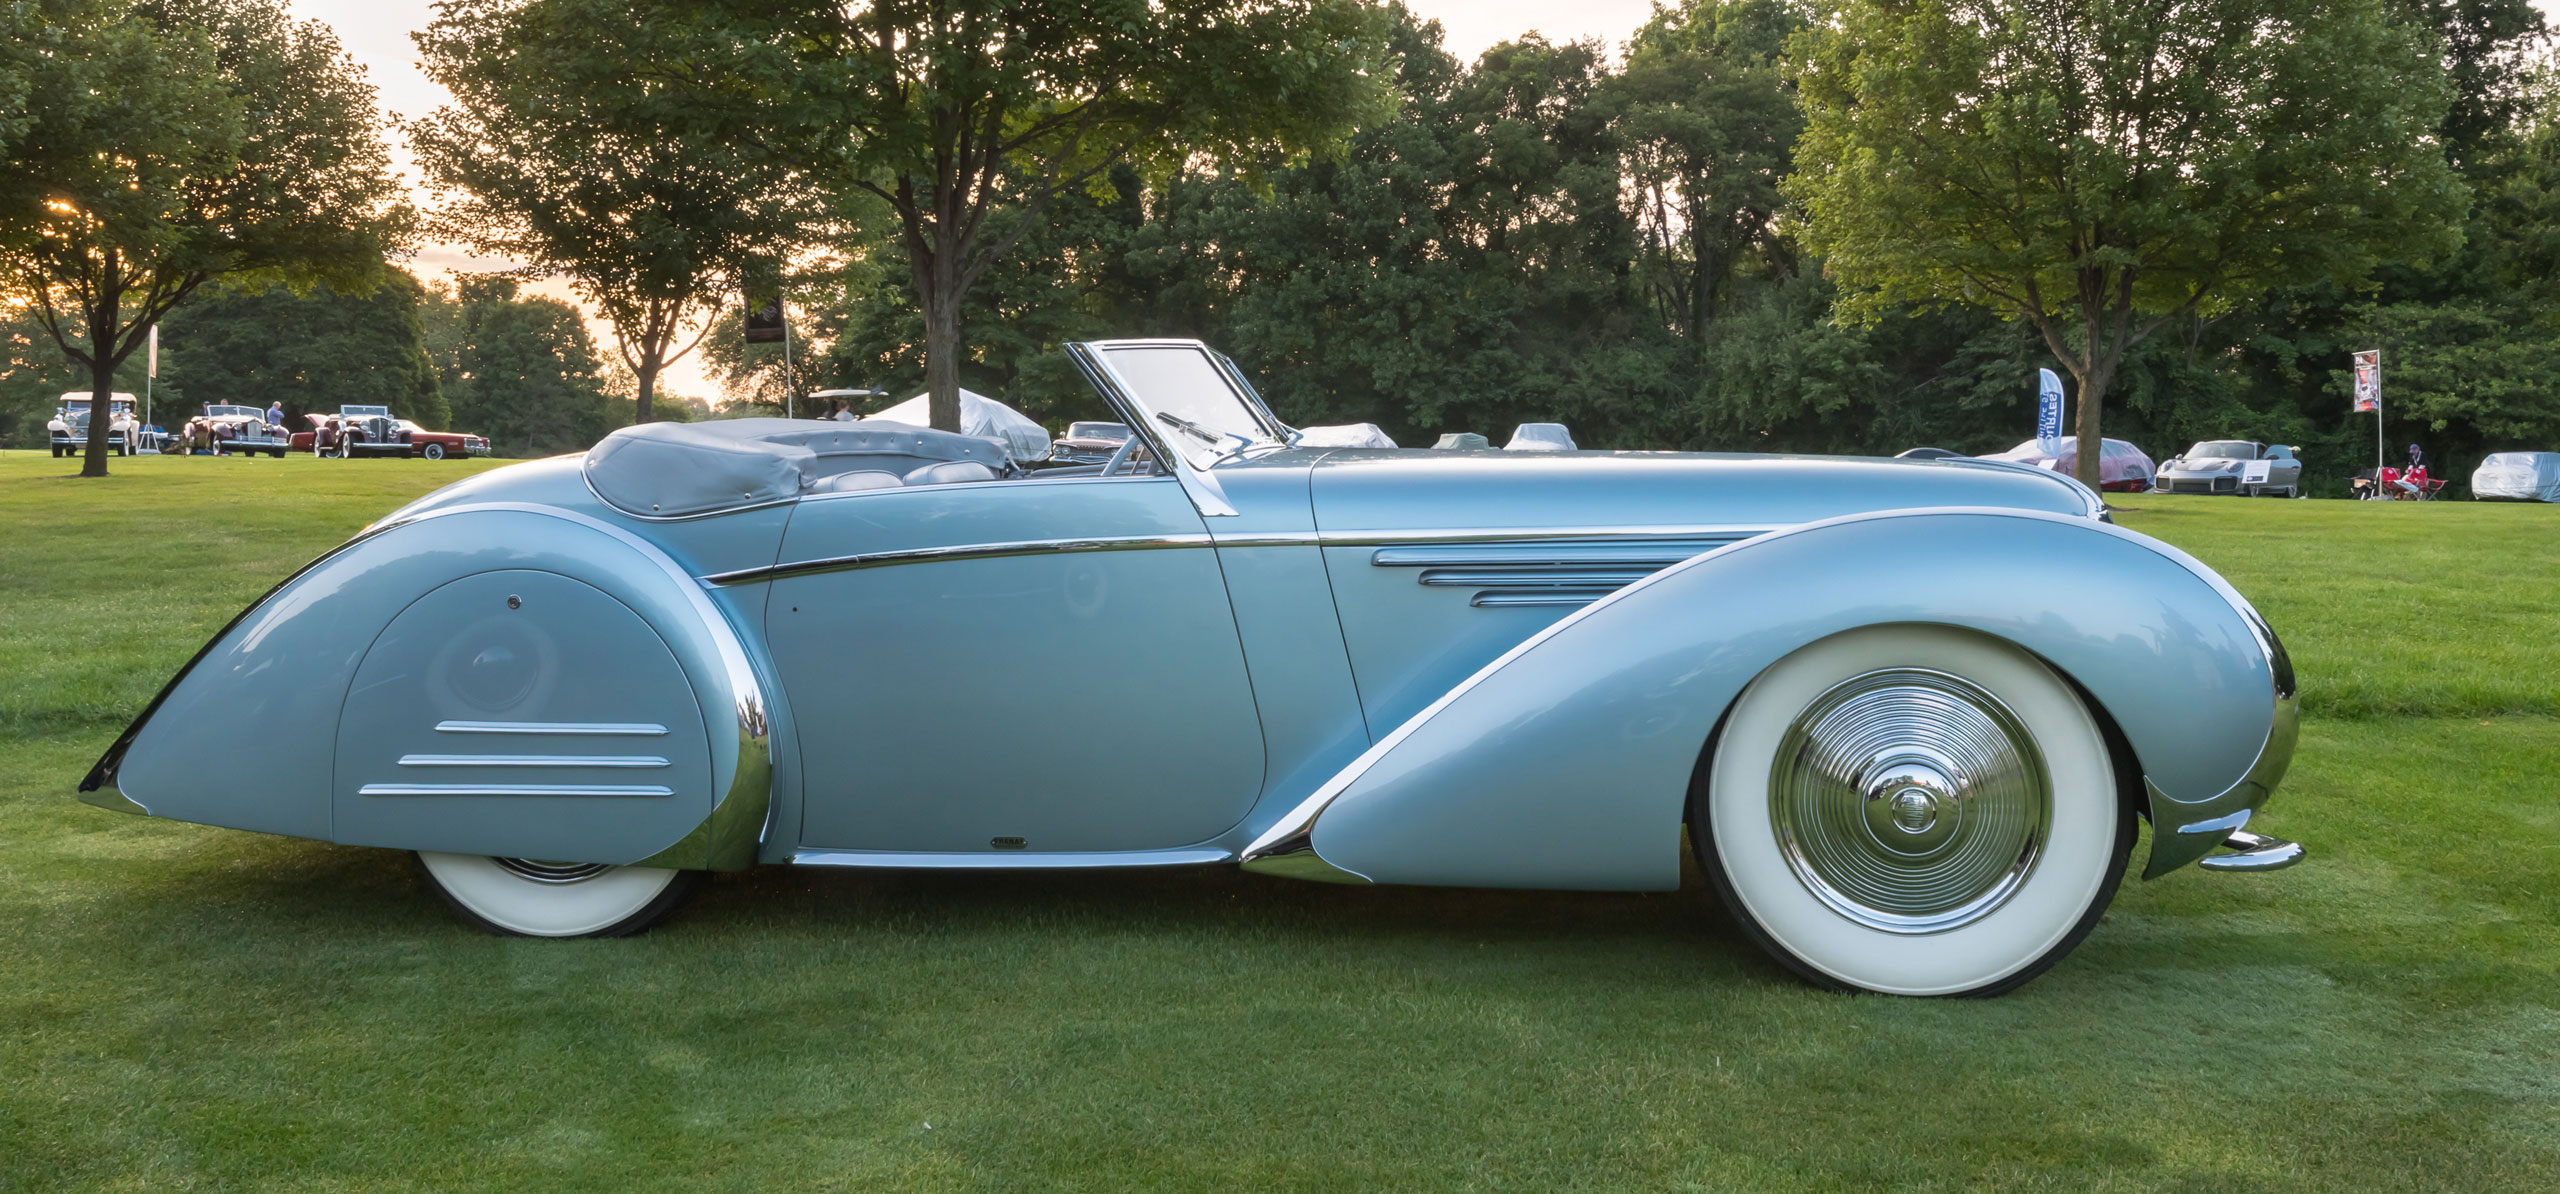 2020 Driving Force Summer Edition - Legislative Front Lines. Pictured Concours-level Delahaye